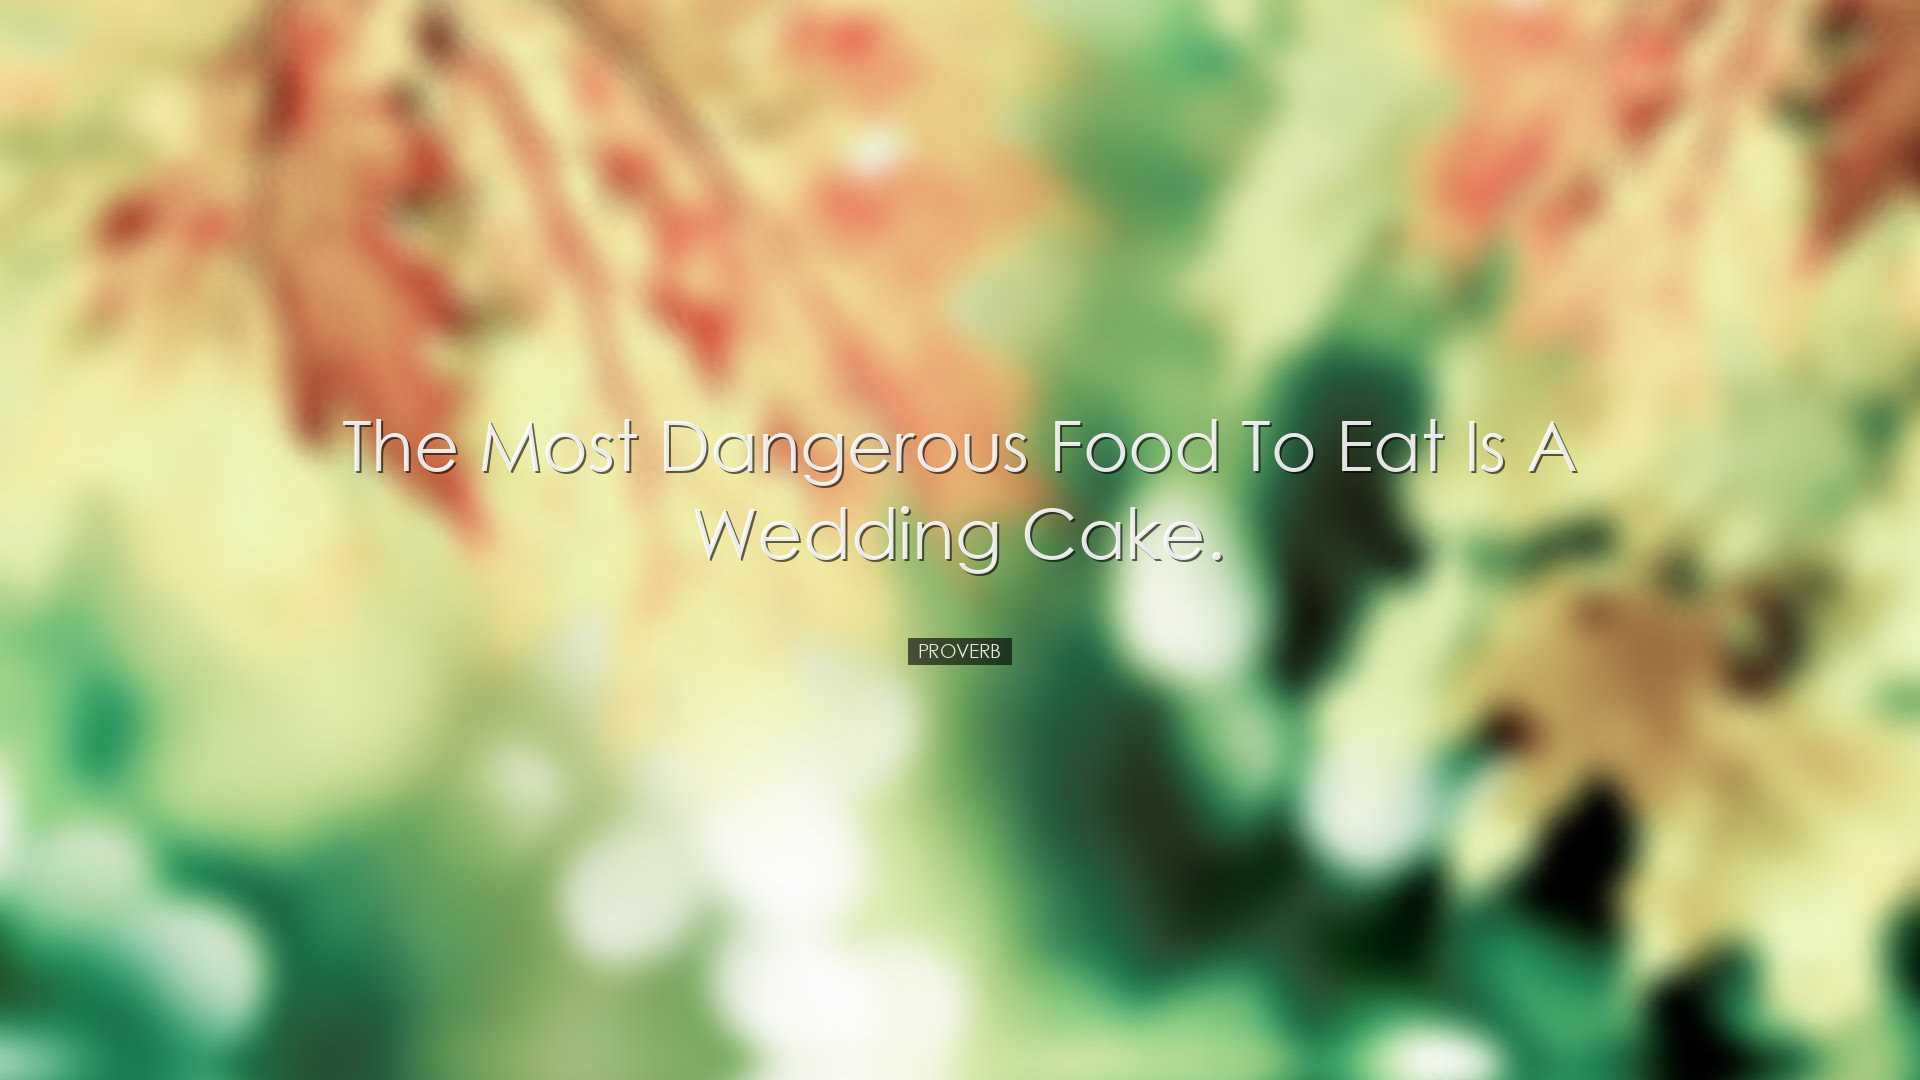 The most dangerous food to eat is a wedding cake. - Proverb